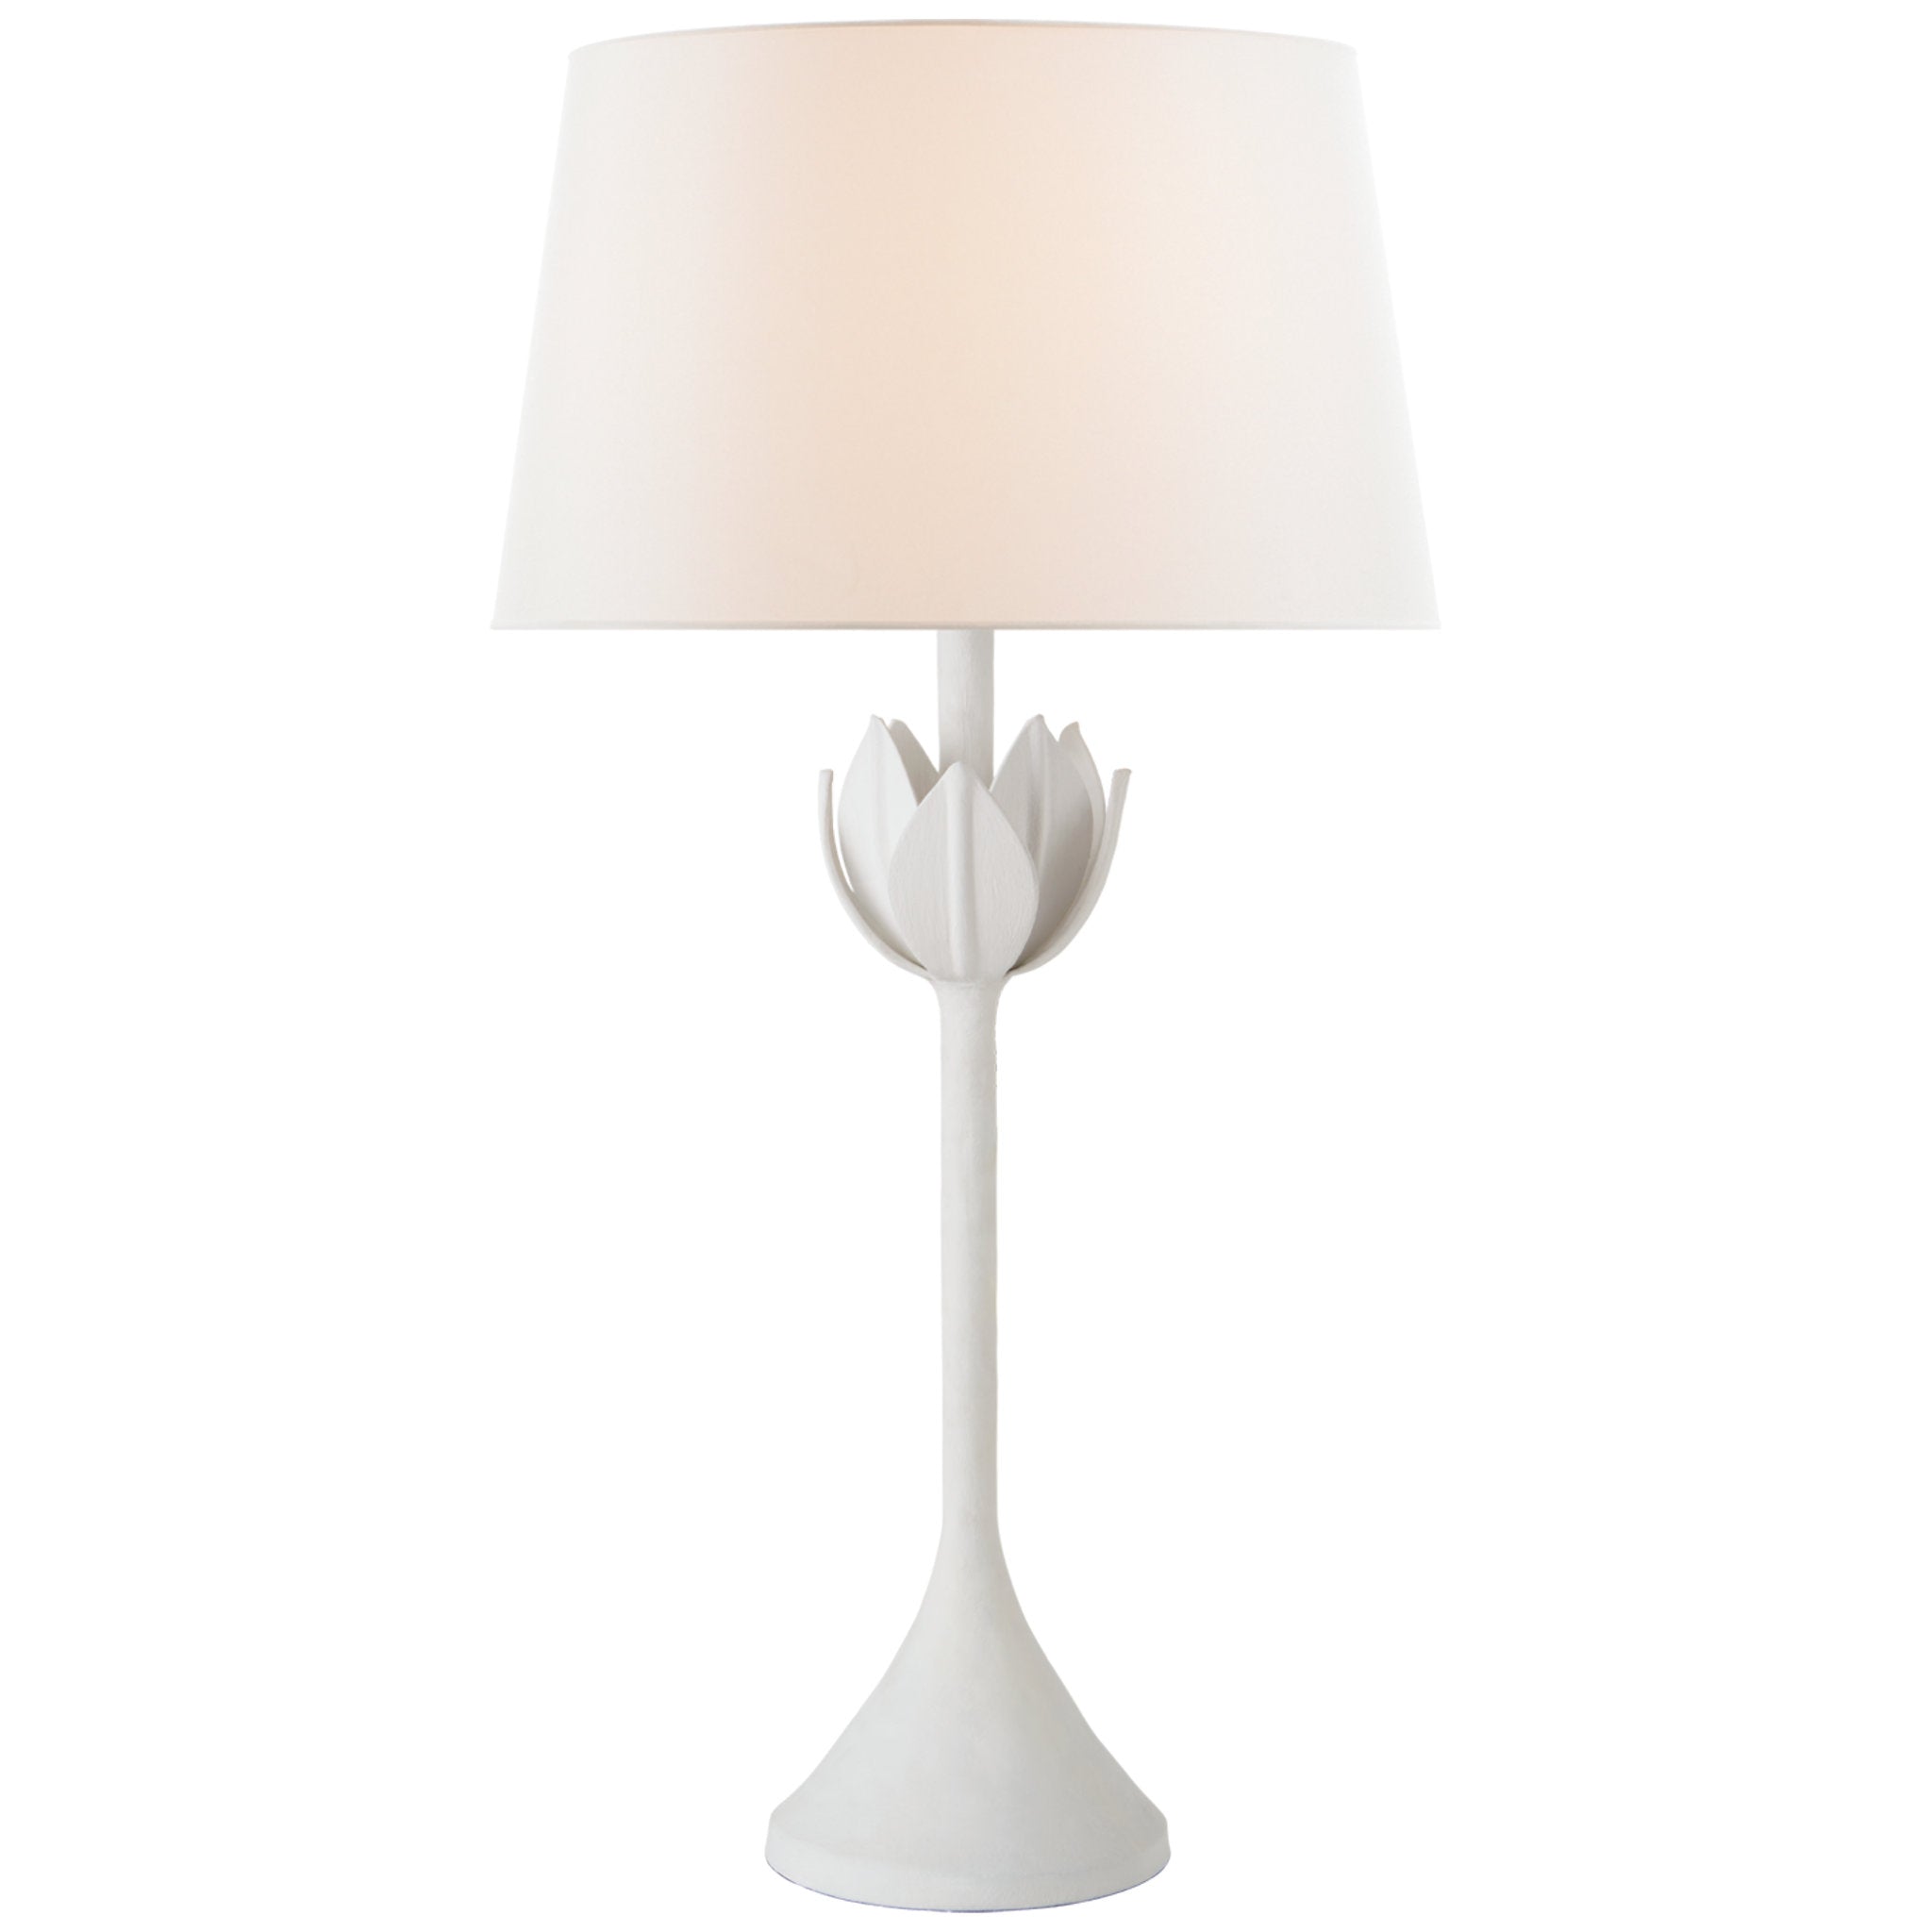 Julie Neill Alberto Large Table Lamp in Plaster White with Linen Shade